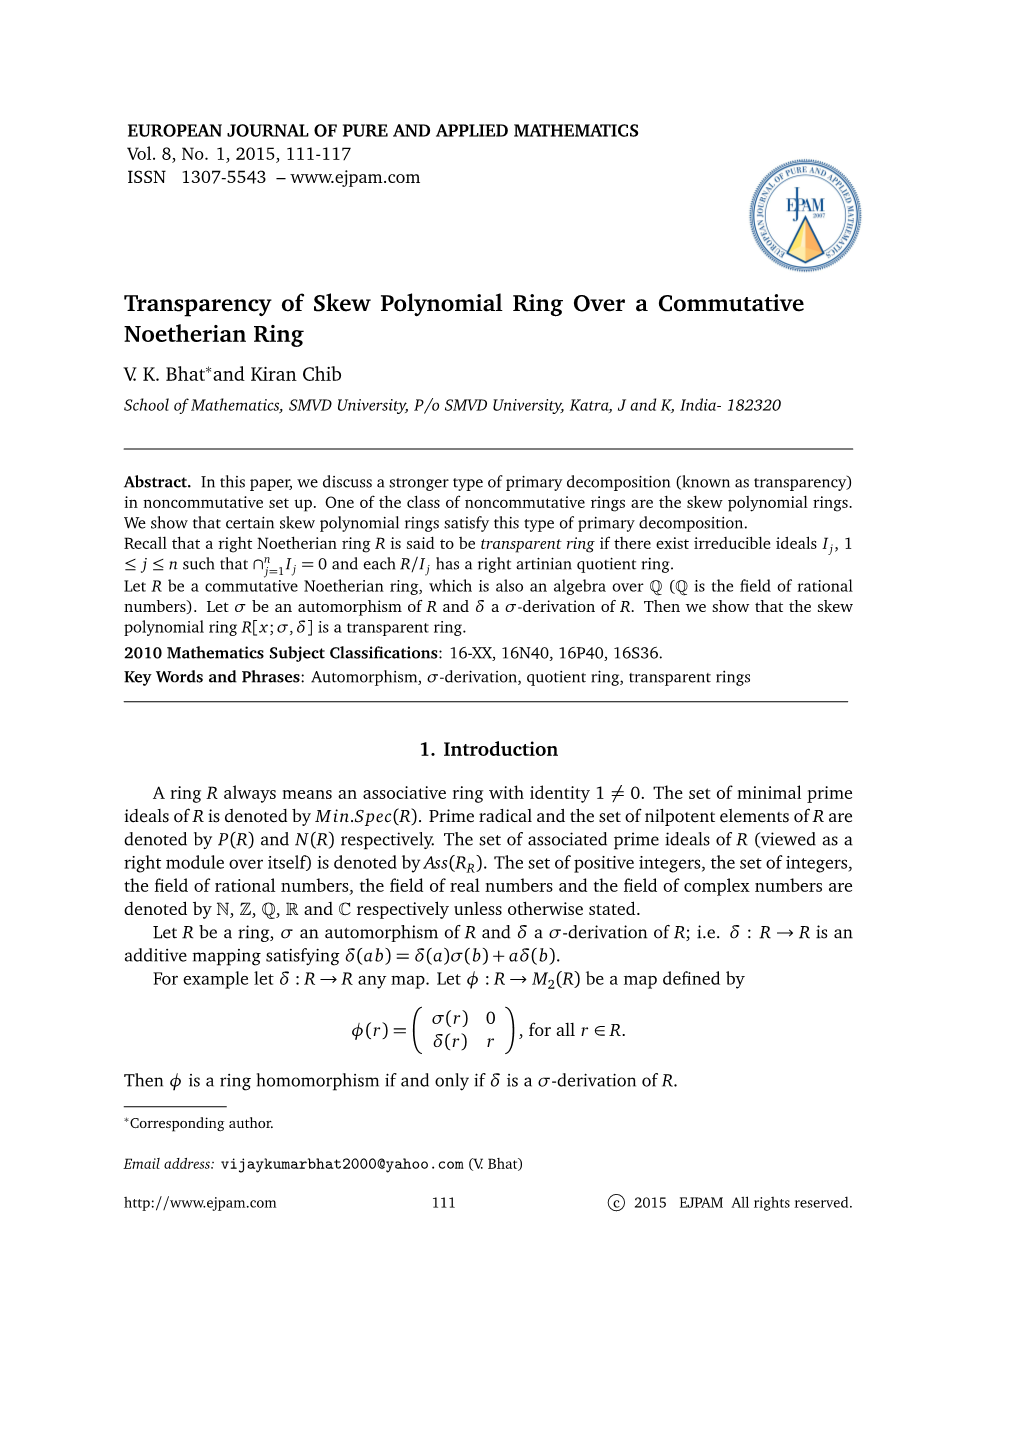 Transparency of Skew Polynomial Ring Over a Commutative Noetherian Ring